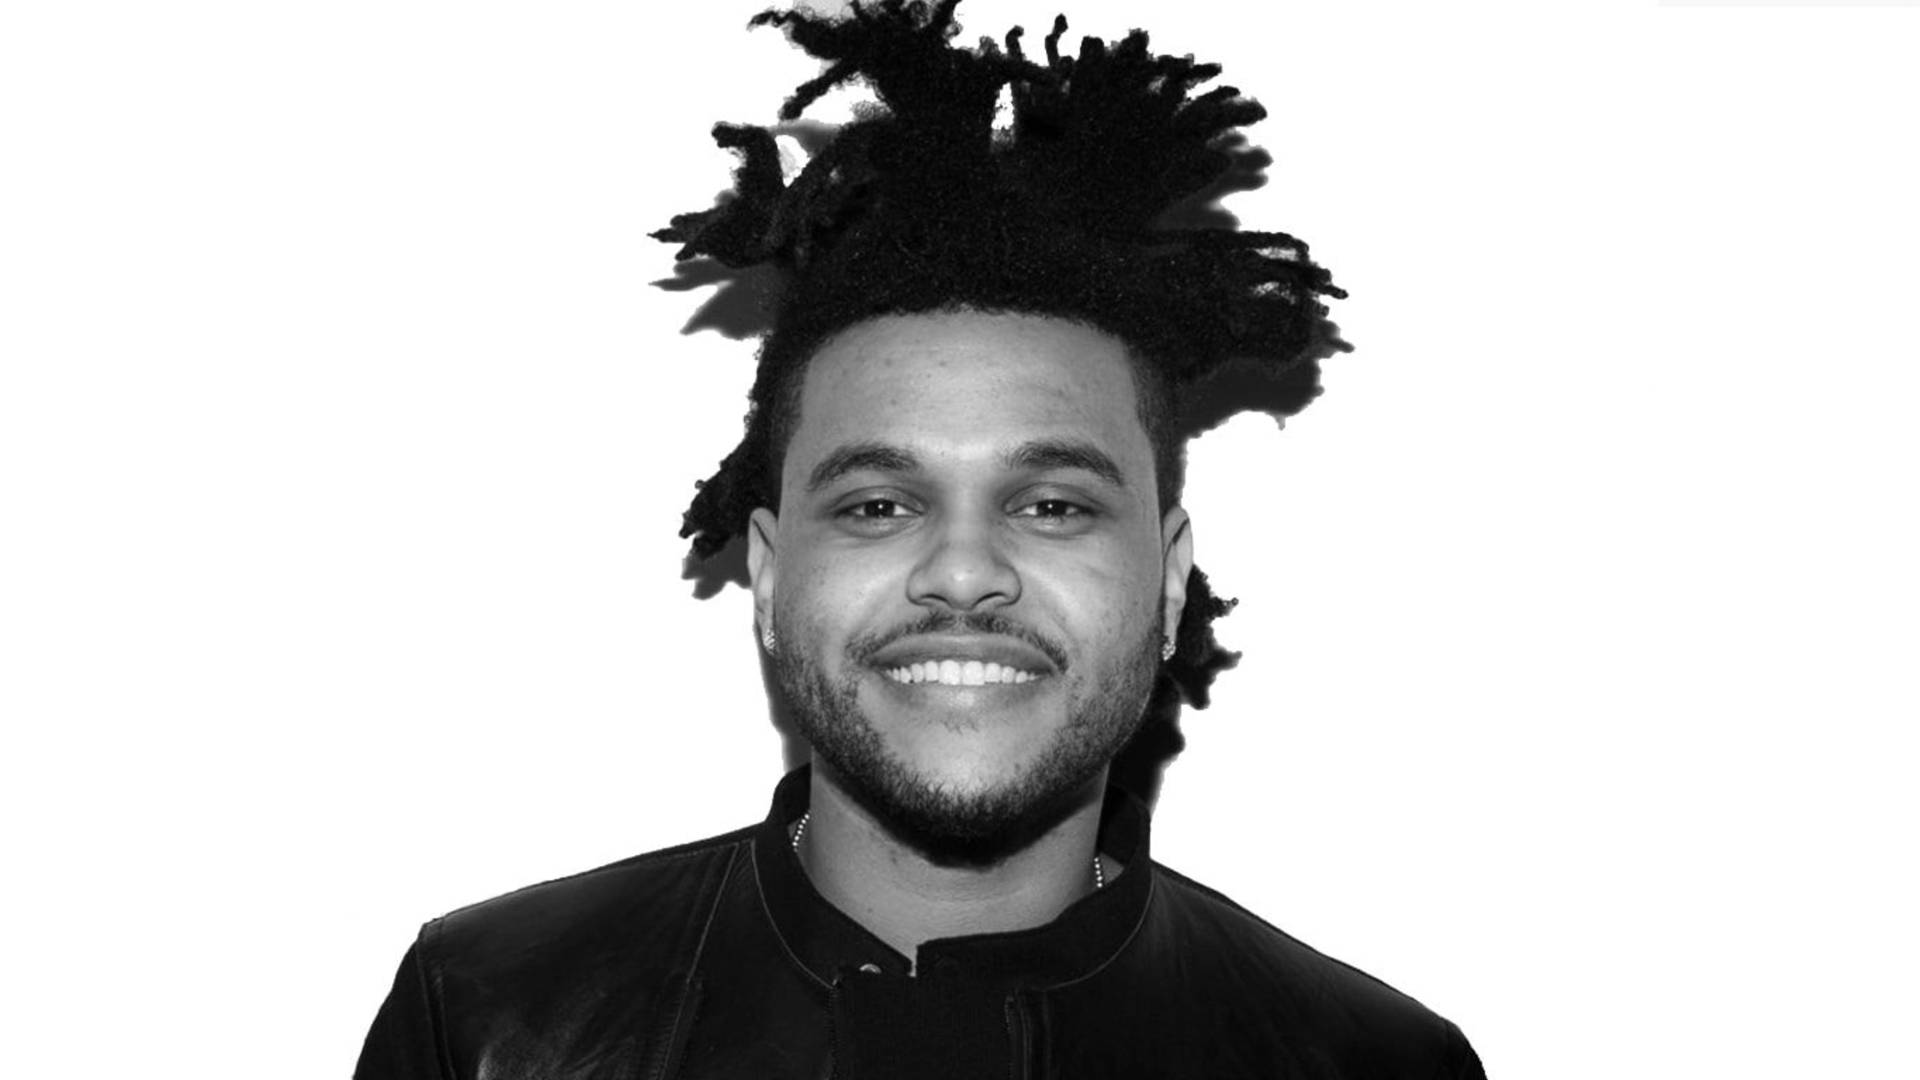 The Weeknd's Captivating Monochrome Smile